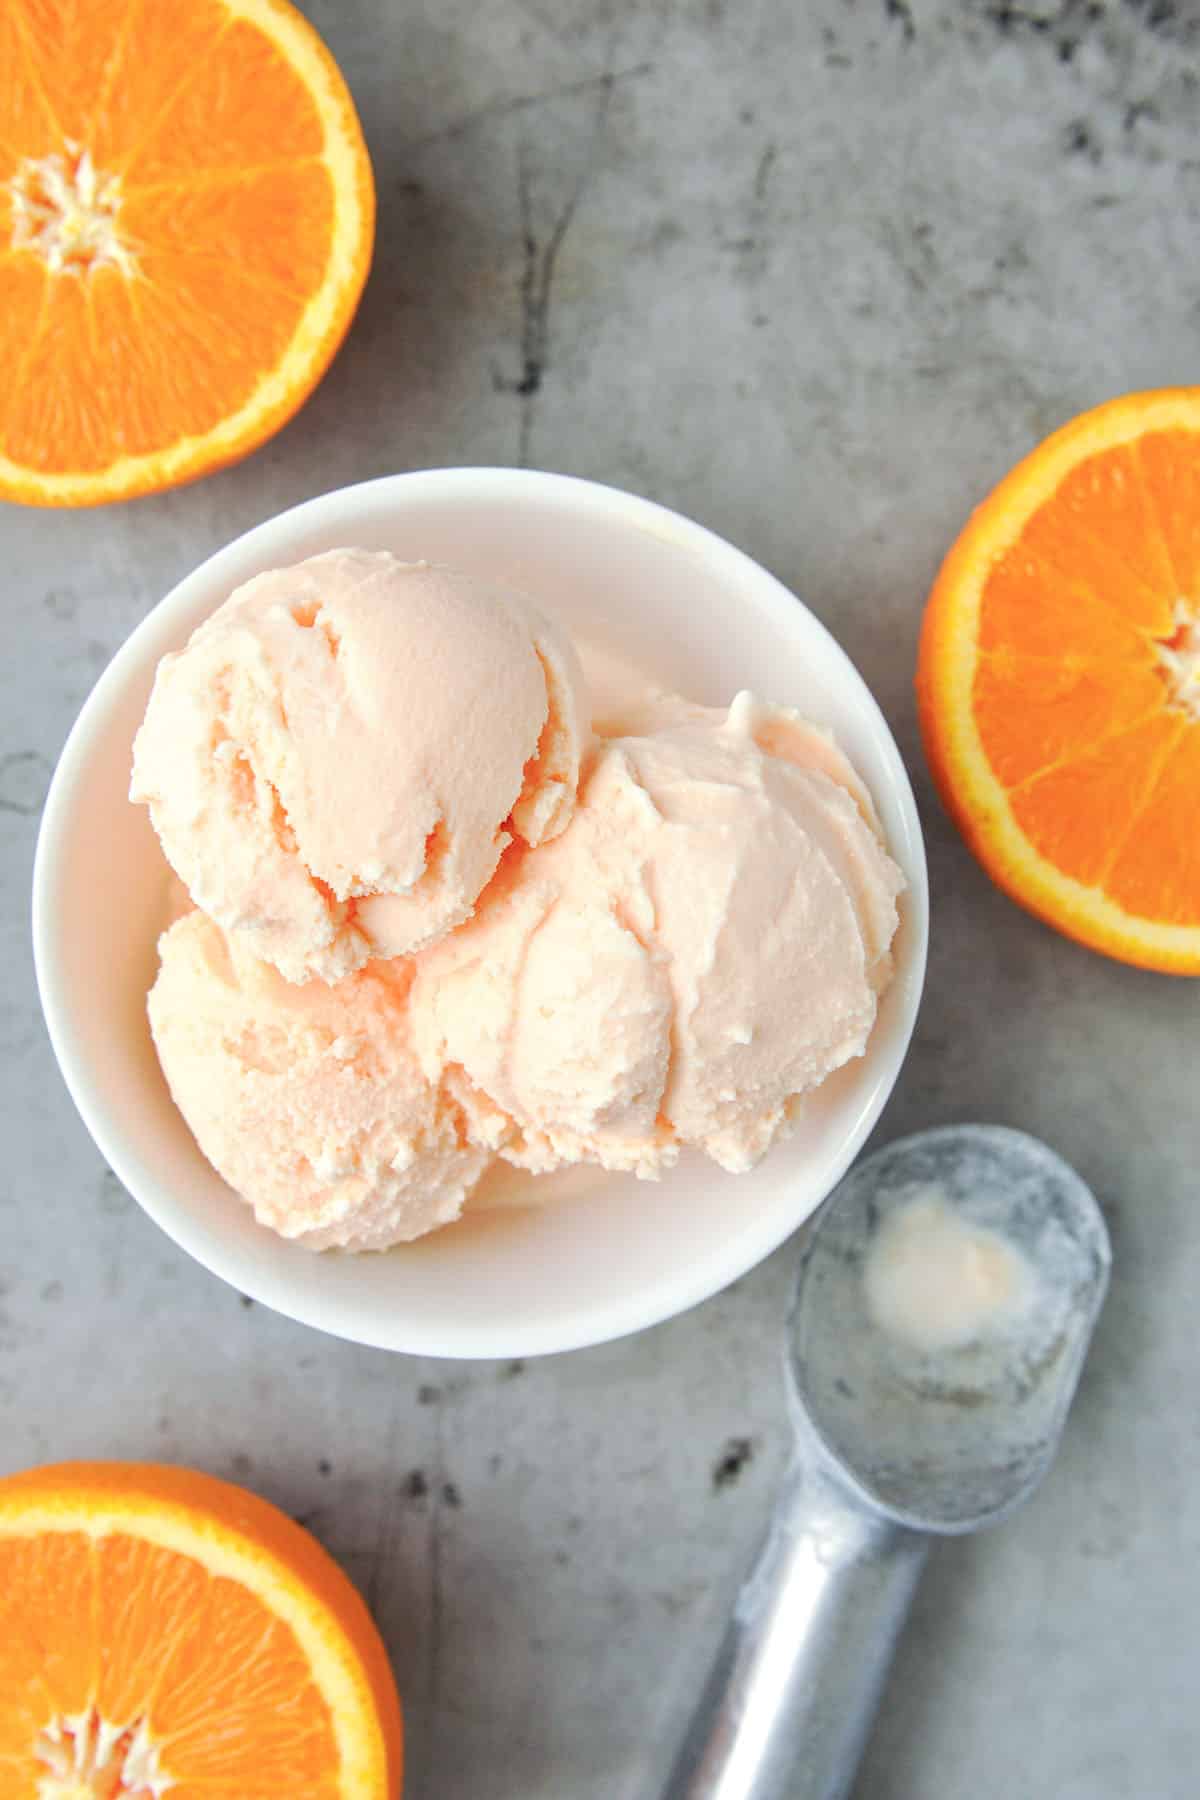 Above view of orange ice cream in a bowl with orange halves and an ice cream scoop.